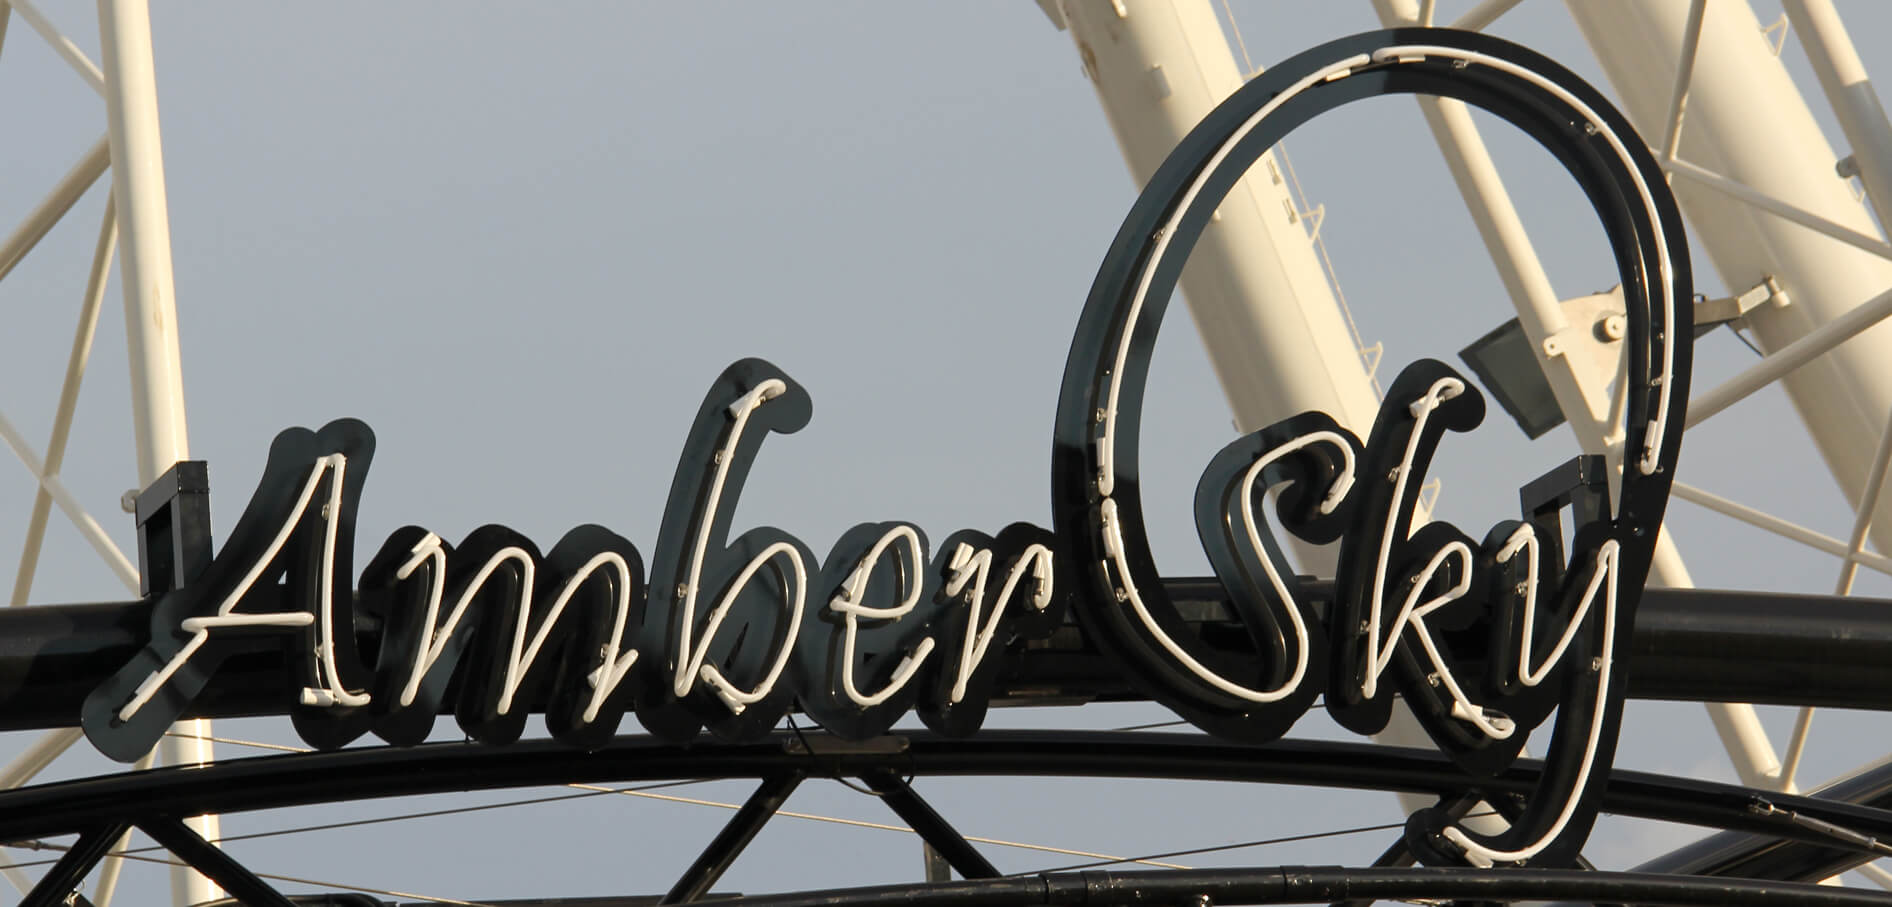 Amber Sky - Amber Sky - white neon sign with the company name placed on the rack